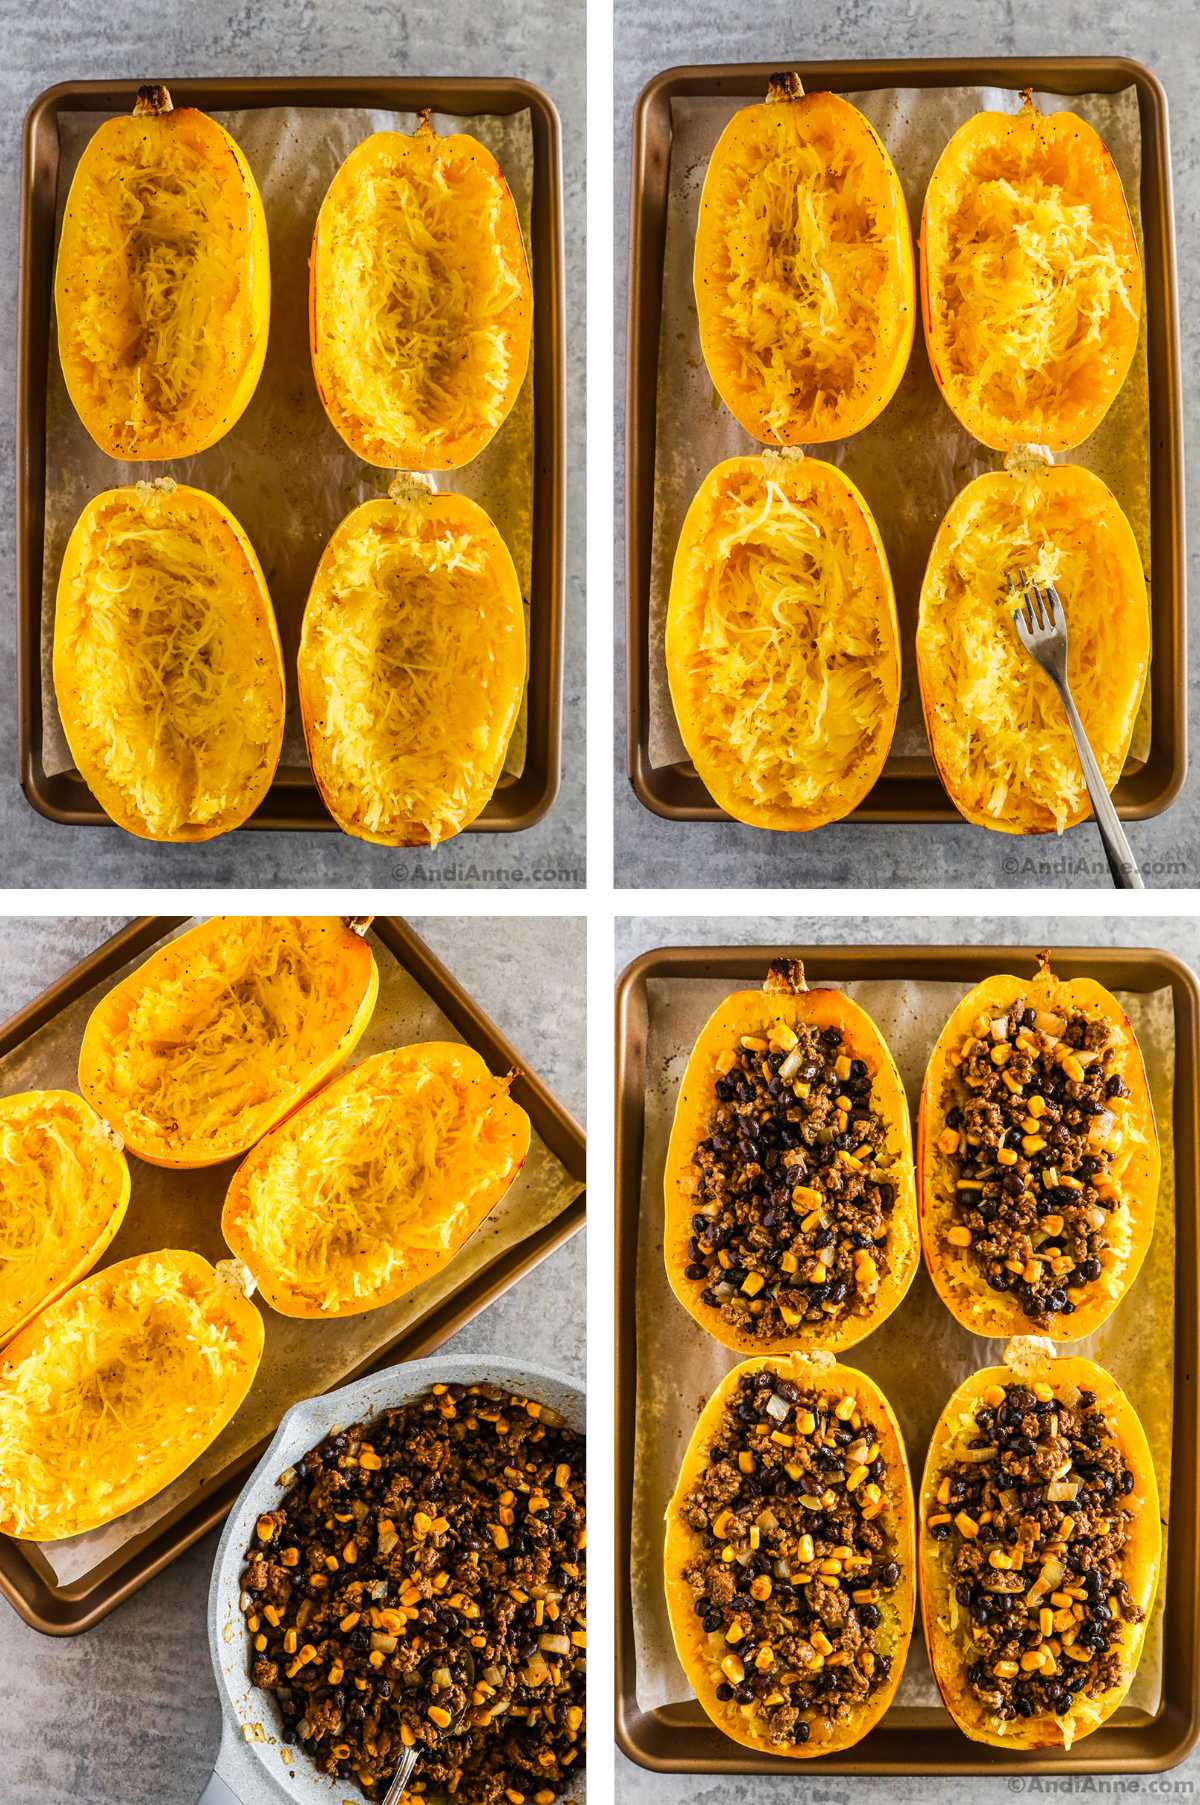 Four overhead images in one: 1. Squash halves have been forked so that strands are loosened. 2. Strands in squash halves have been piled into middle of each squash half. 3. image of ground beef mixture in pan next to four squash halves on baking sheet. 4. Ground beef mixture has been evenly added to each squash half. 